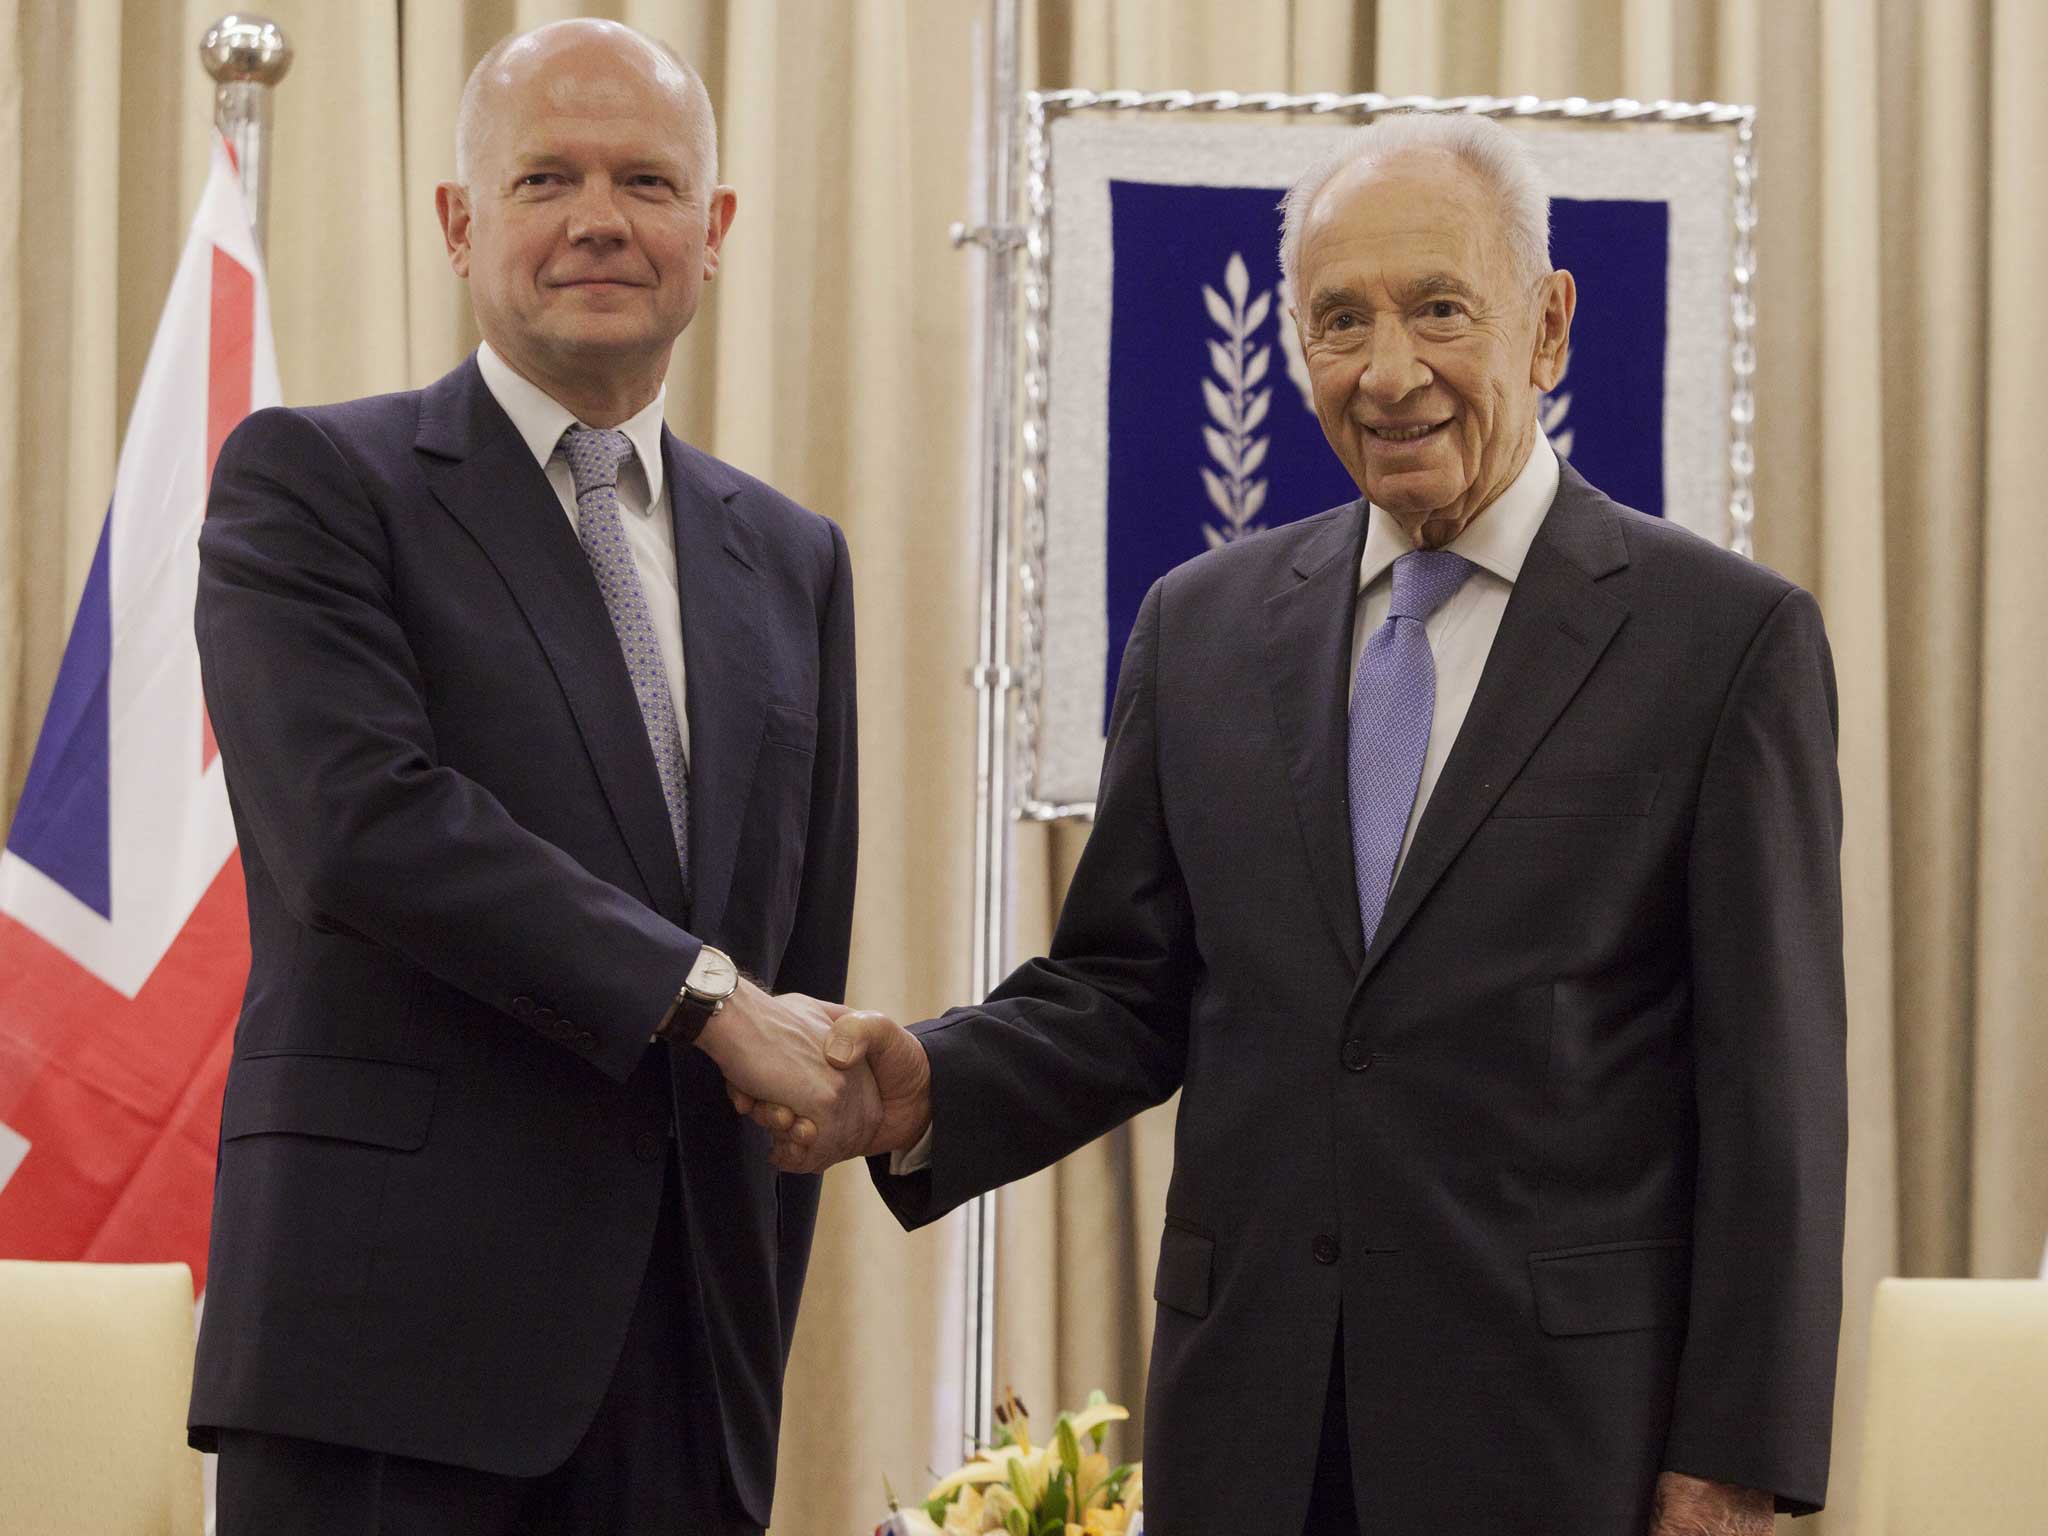 William Hague, left, shakes hands with Israeli President Shimon Peres